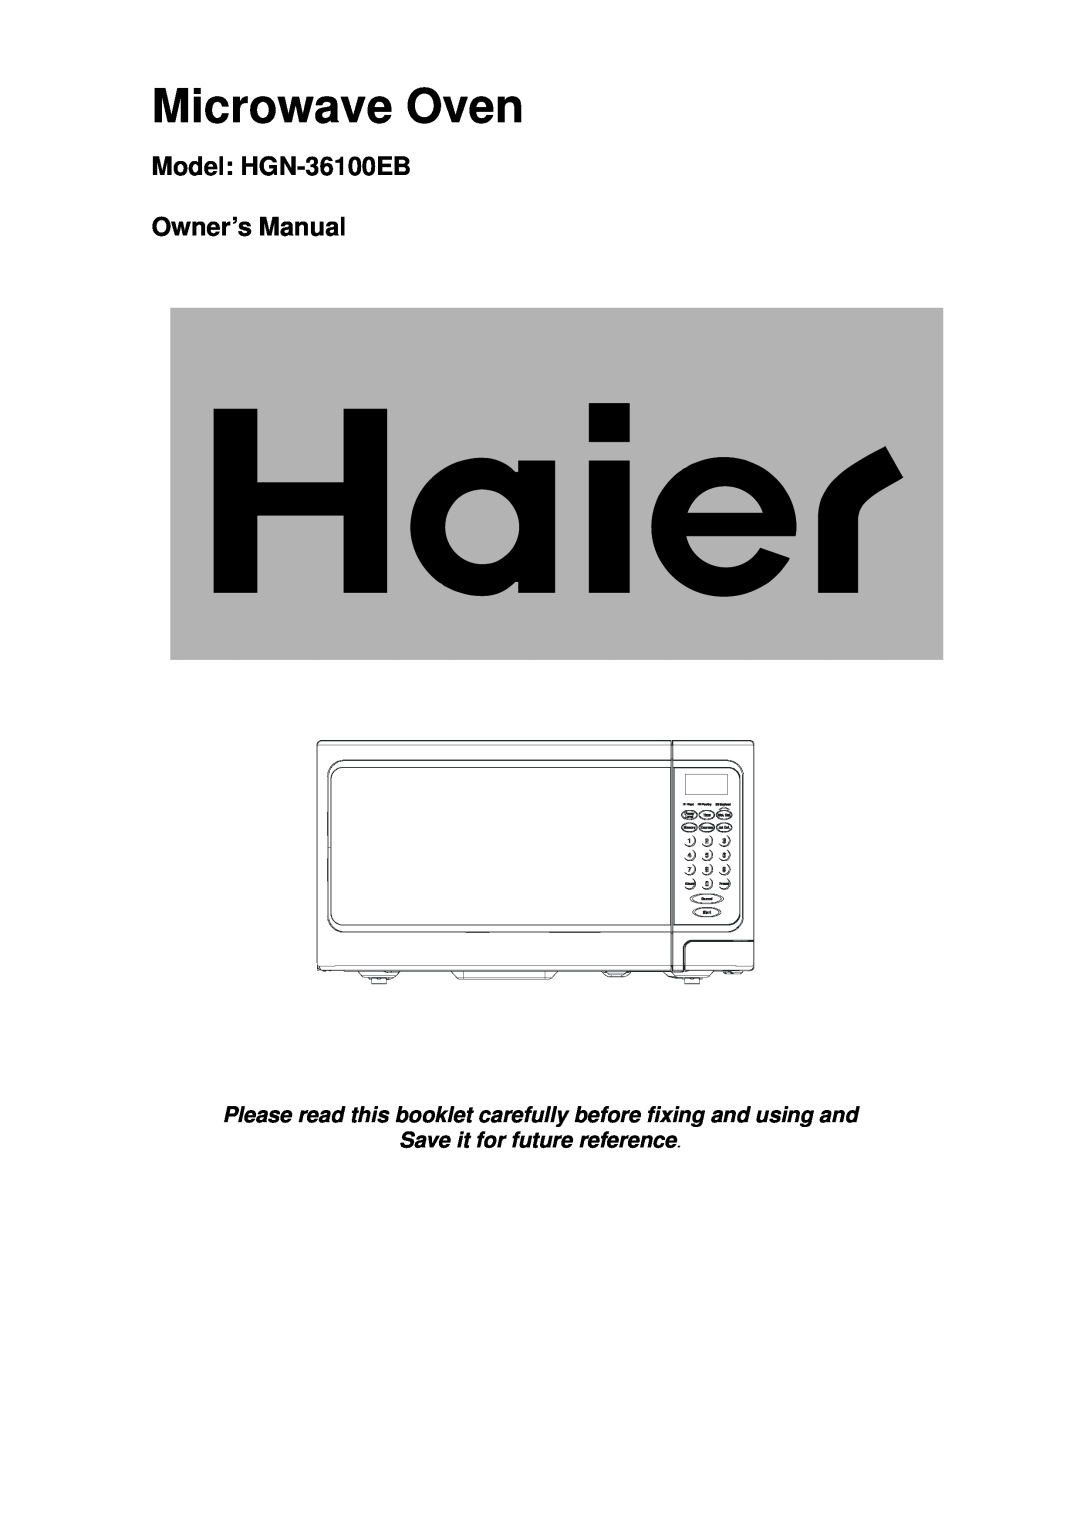 Haier HGN-36100EB owner manual Microwave Oven, Save it for future reference 